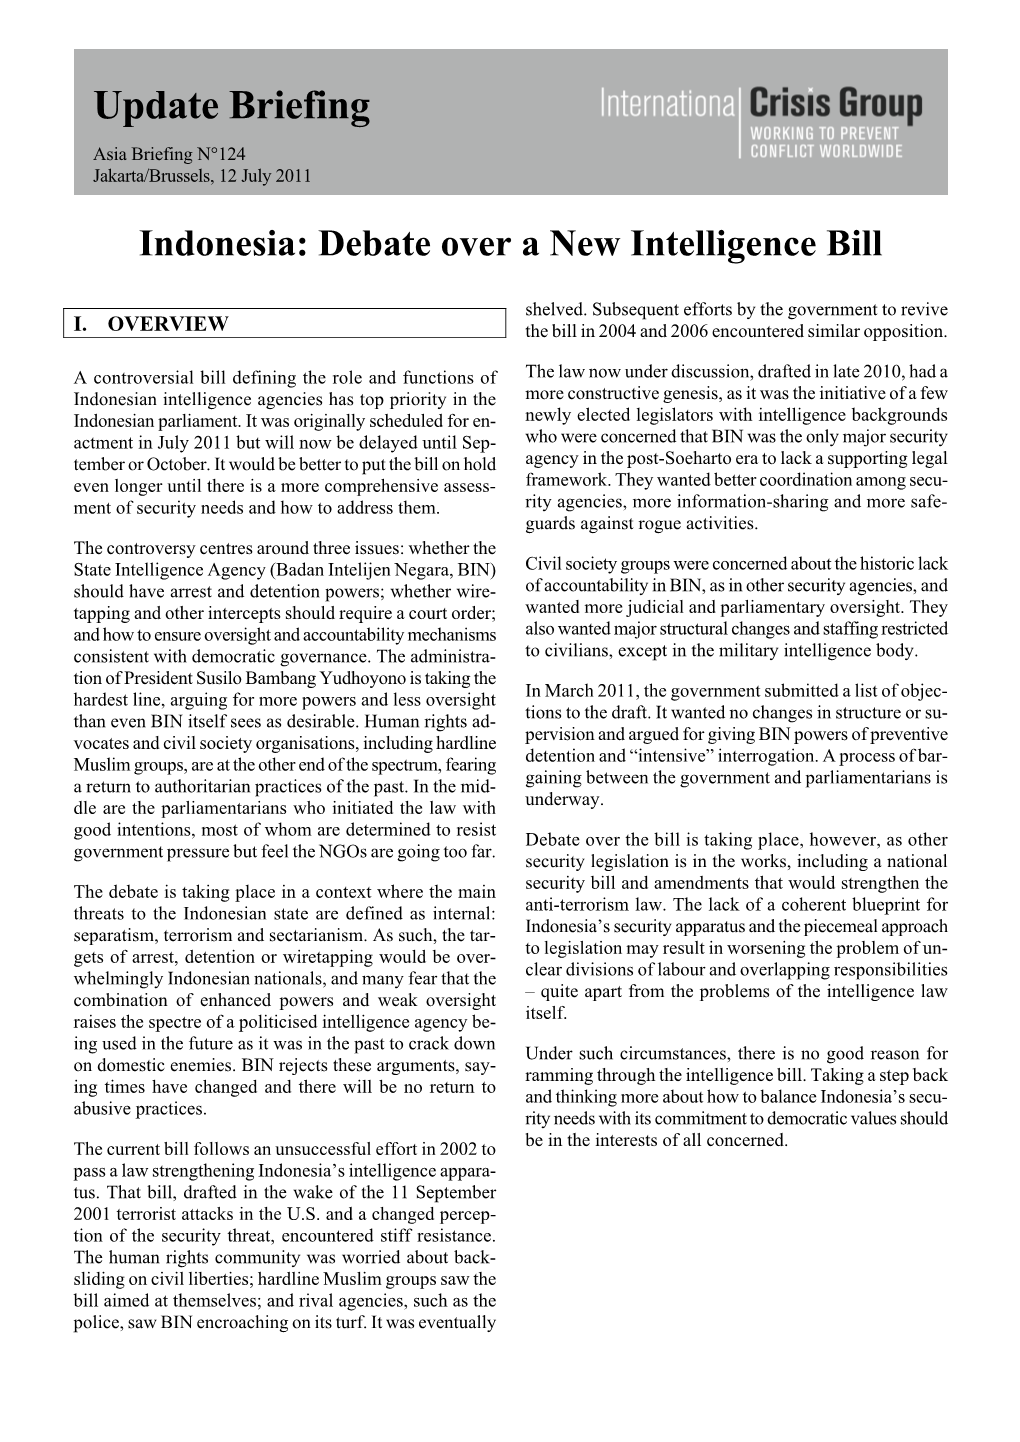 Indonesia: Debate Over a New Intelligence Bill